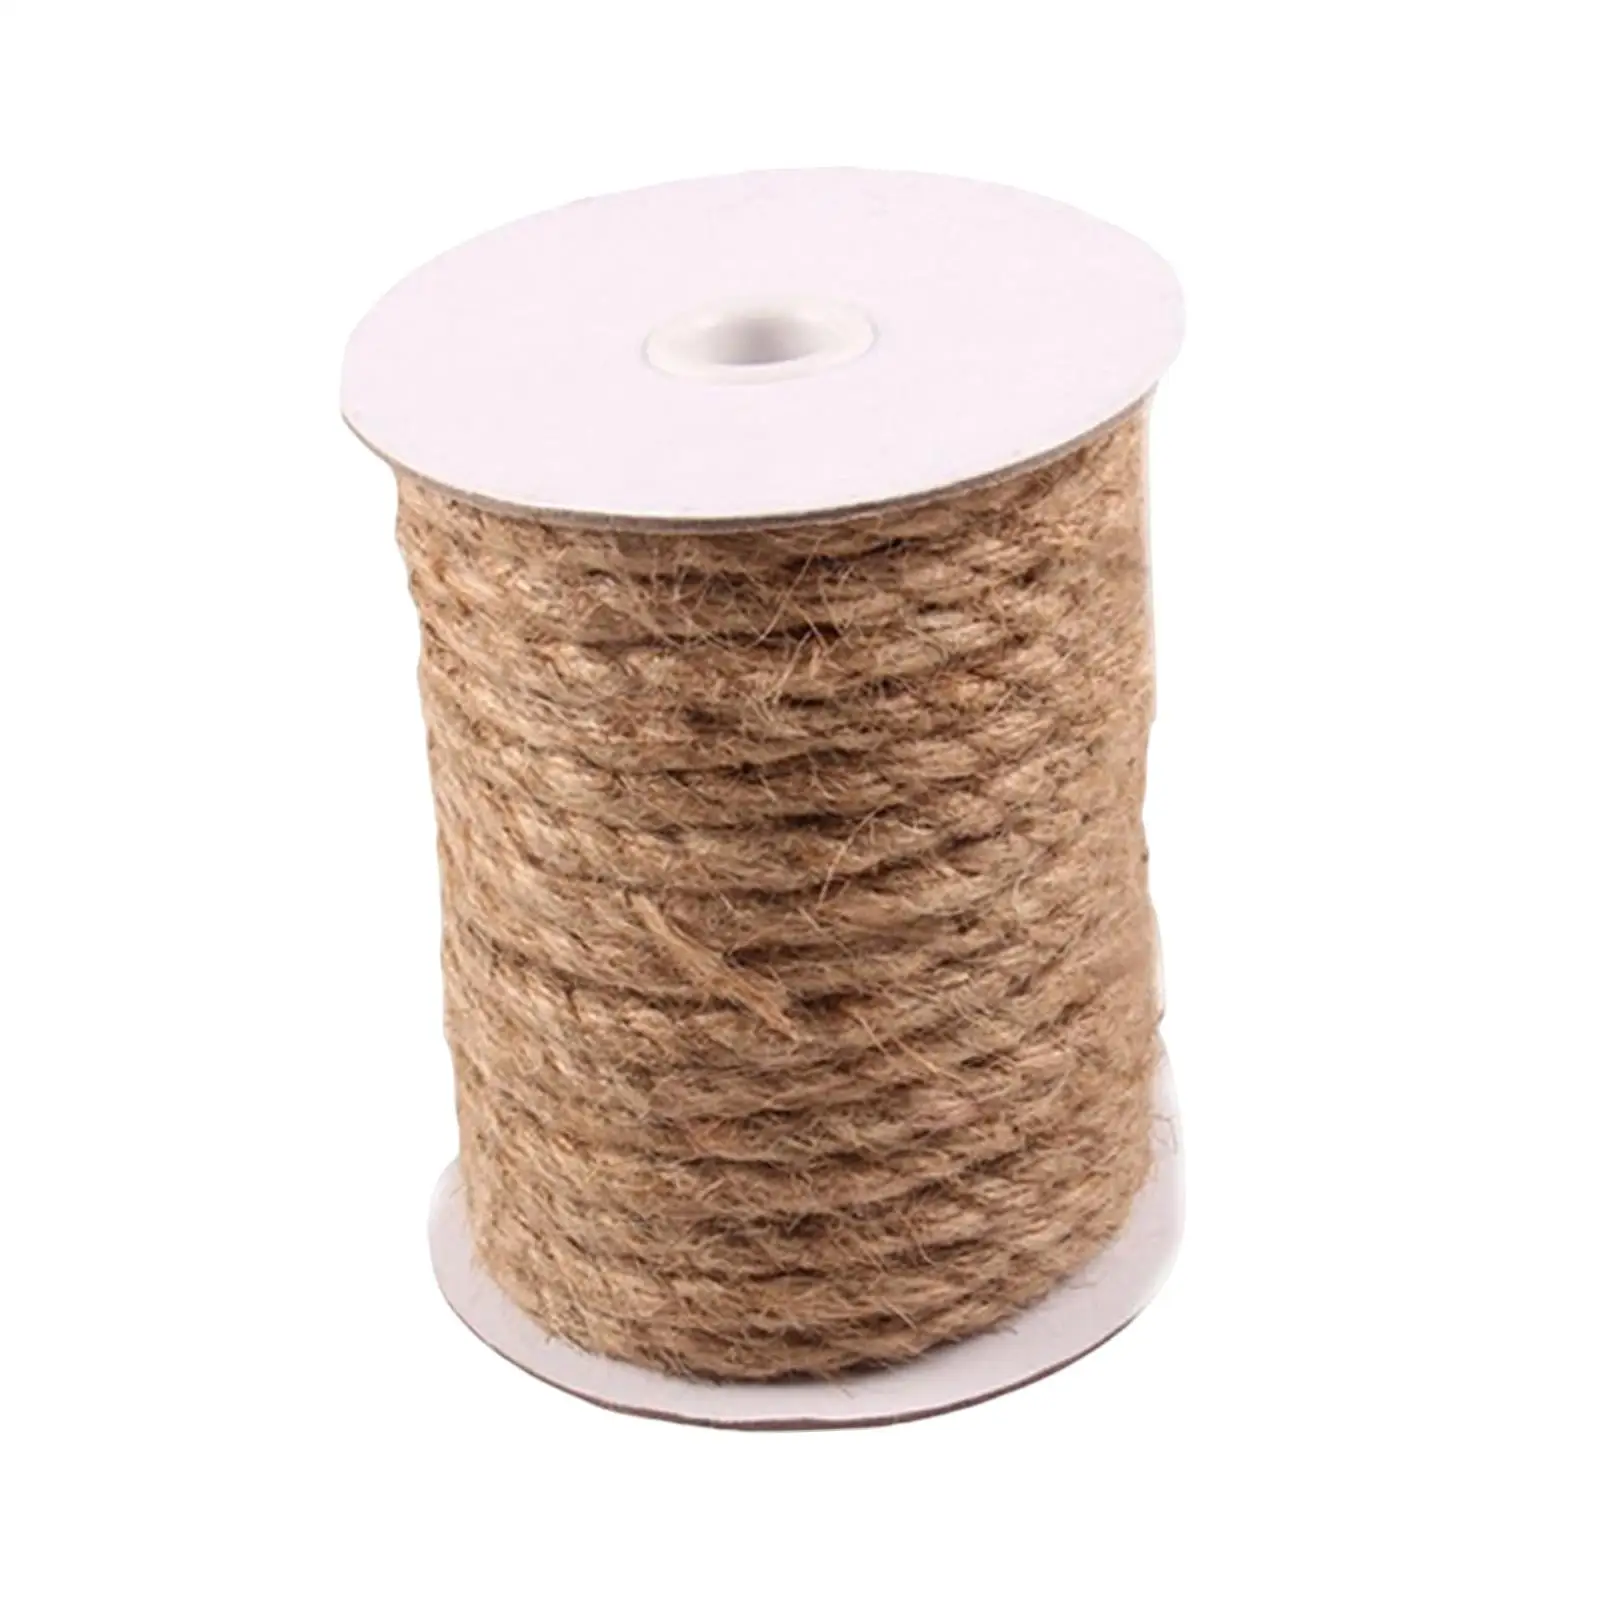 Burlap Twine Rope 15M Thick Multipurpose Hand Woven 8mm Jute Rope for Gardening Pet Toys DIY Projects Gift Wrapping